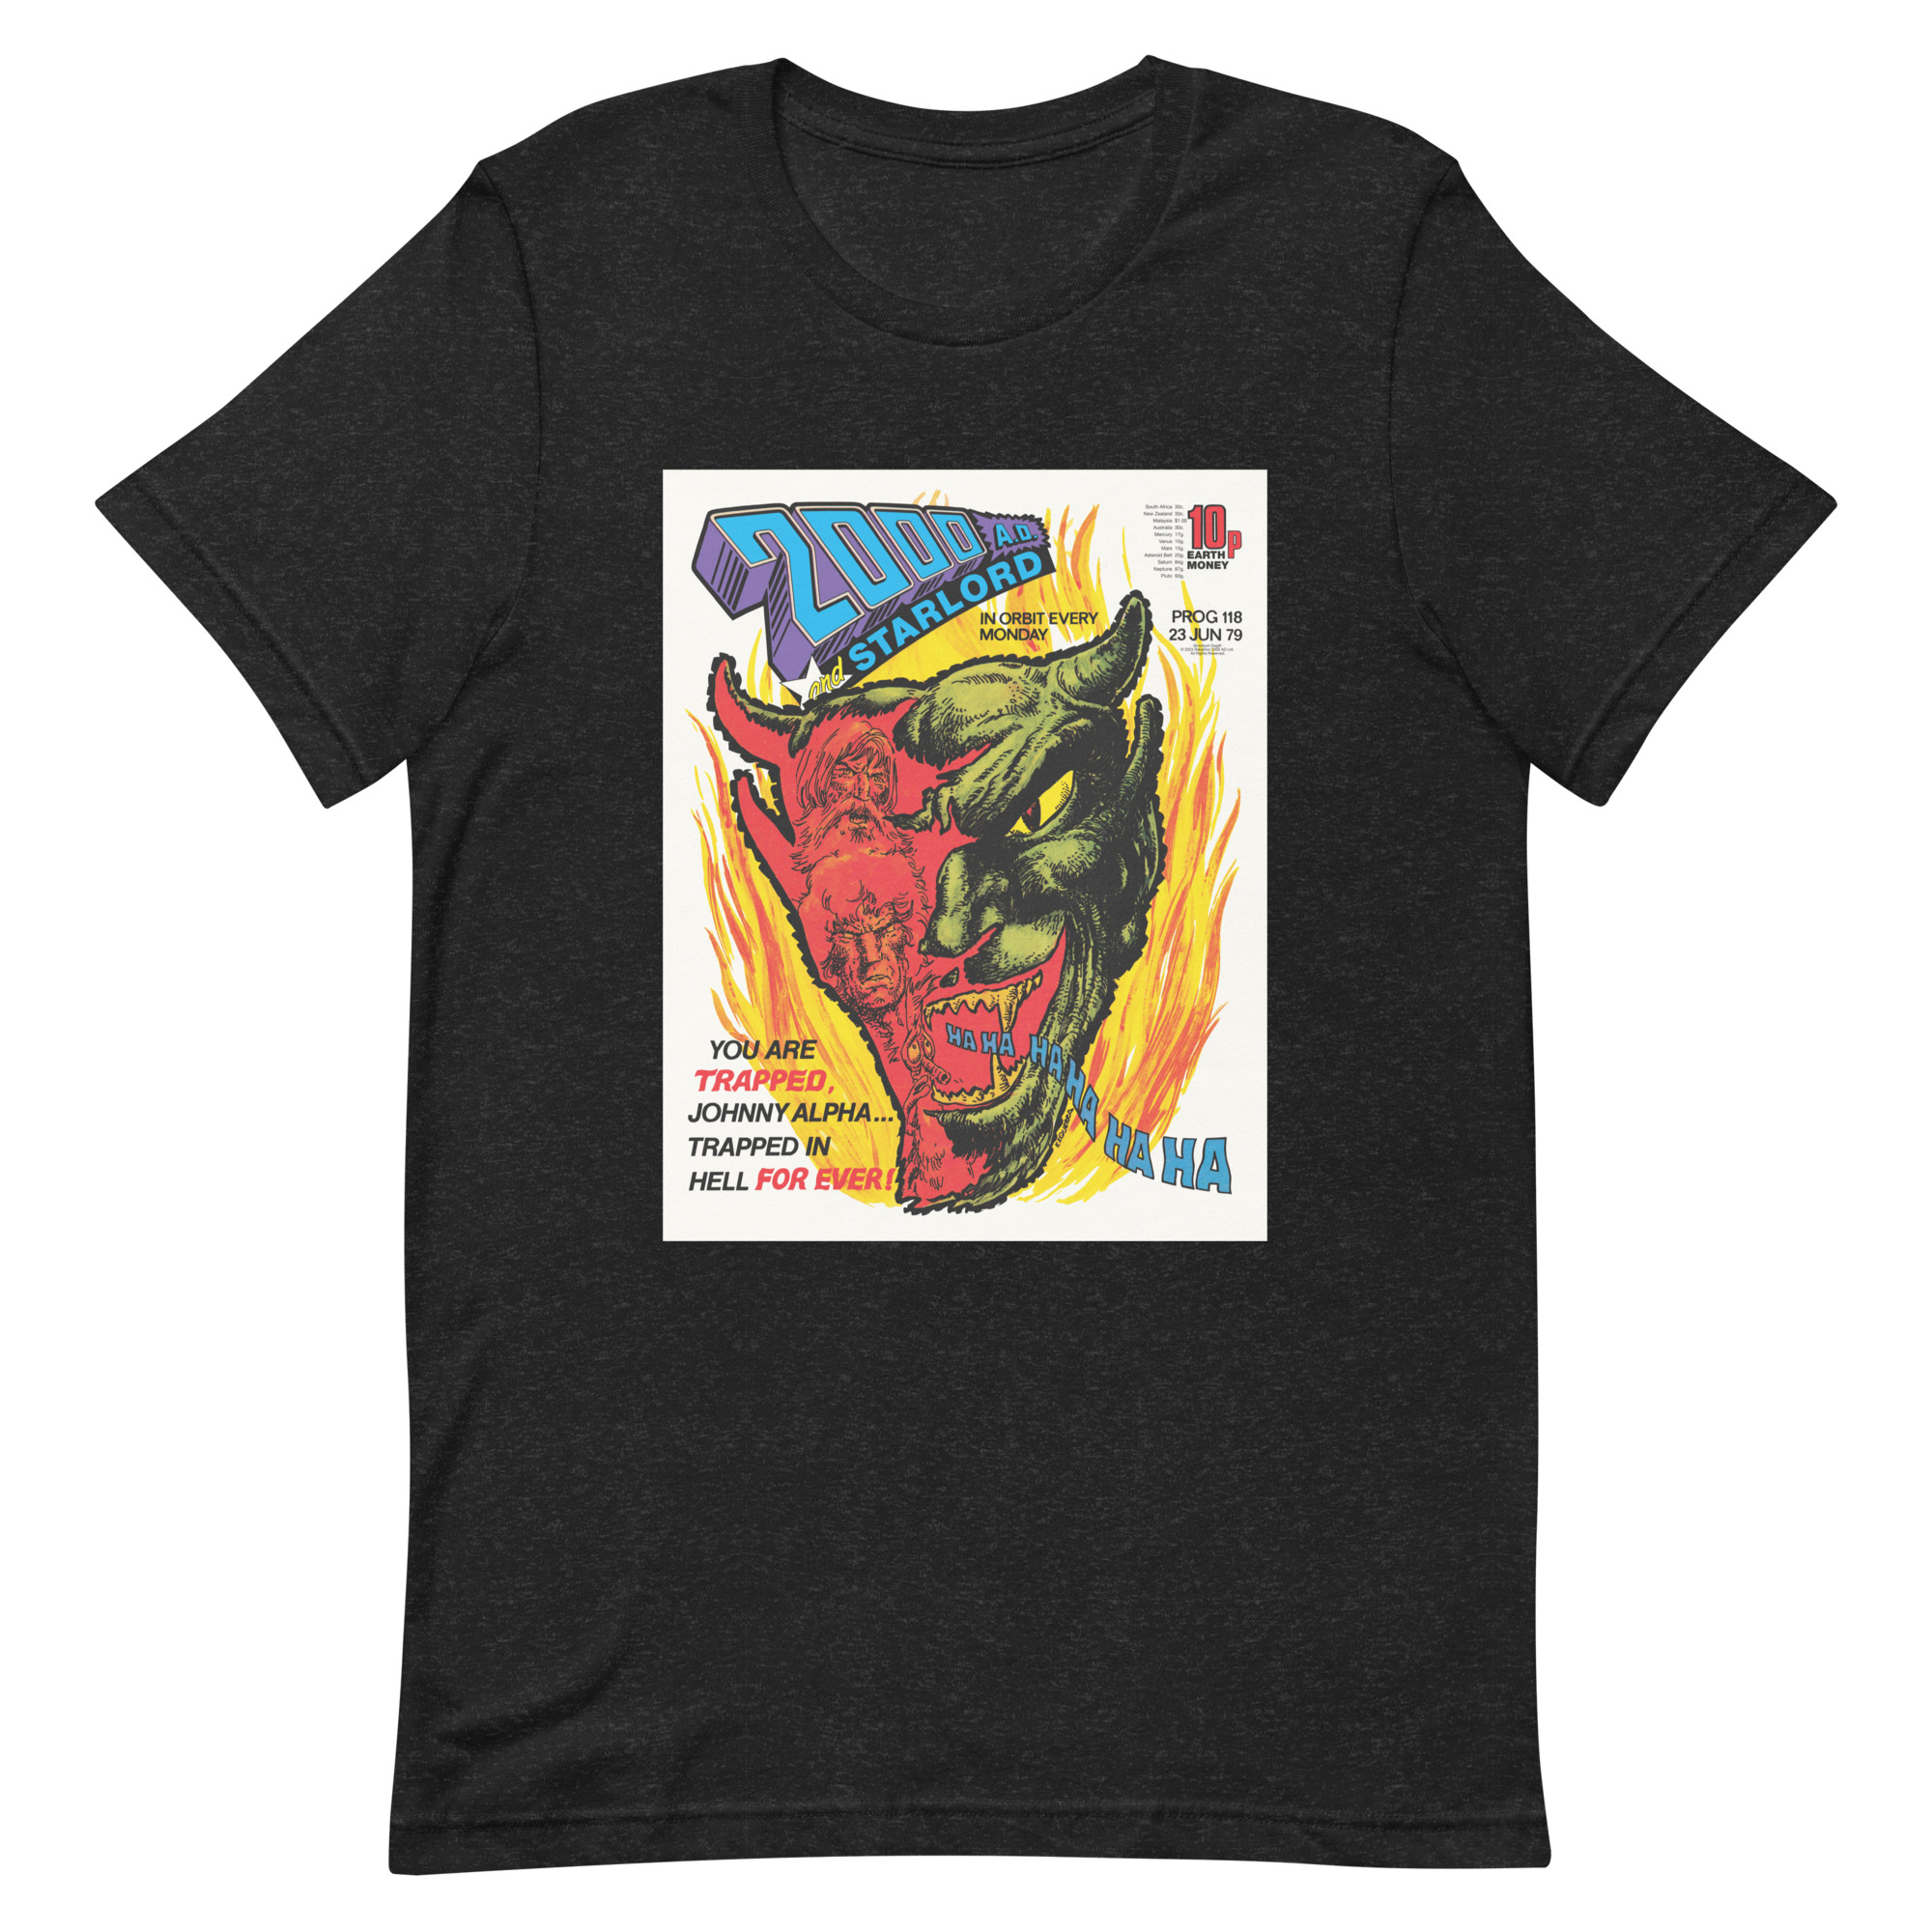 Black Tshirt with an image on the chest. Image is cover of 2000 AD prog 118 and depicts a laughing Devil face in flames